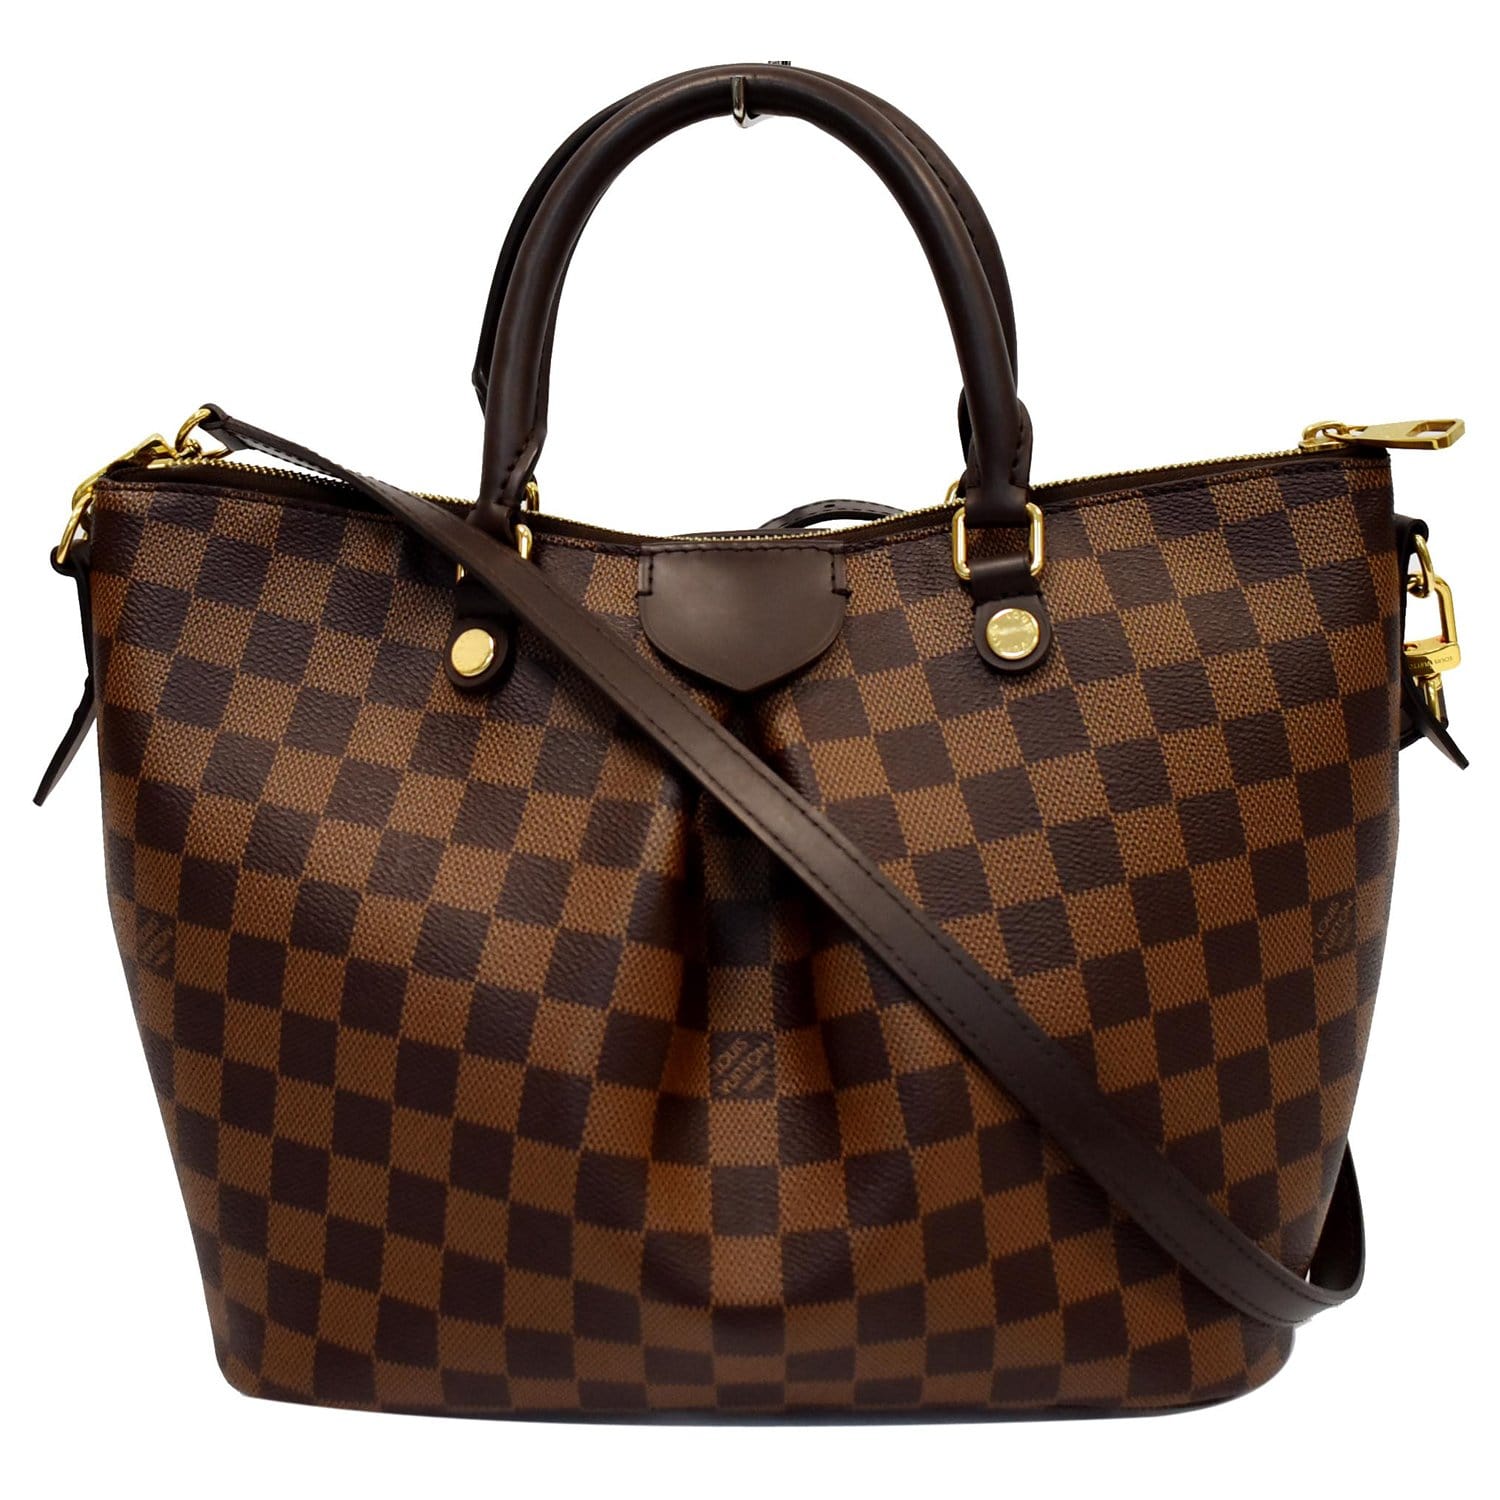 Crown Luxury Resale - Louis Vuitton Siena PM $1295 and Neverfull PM $995